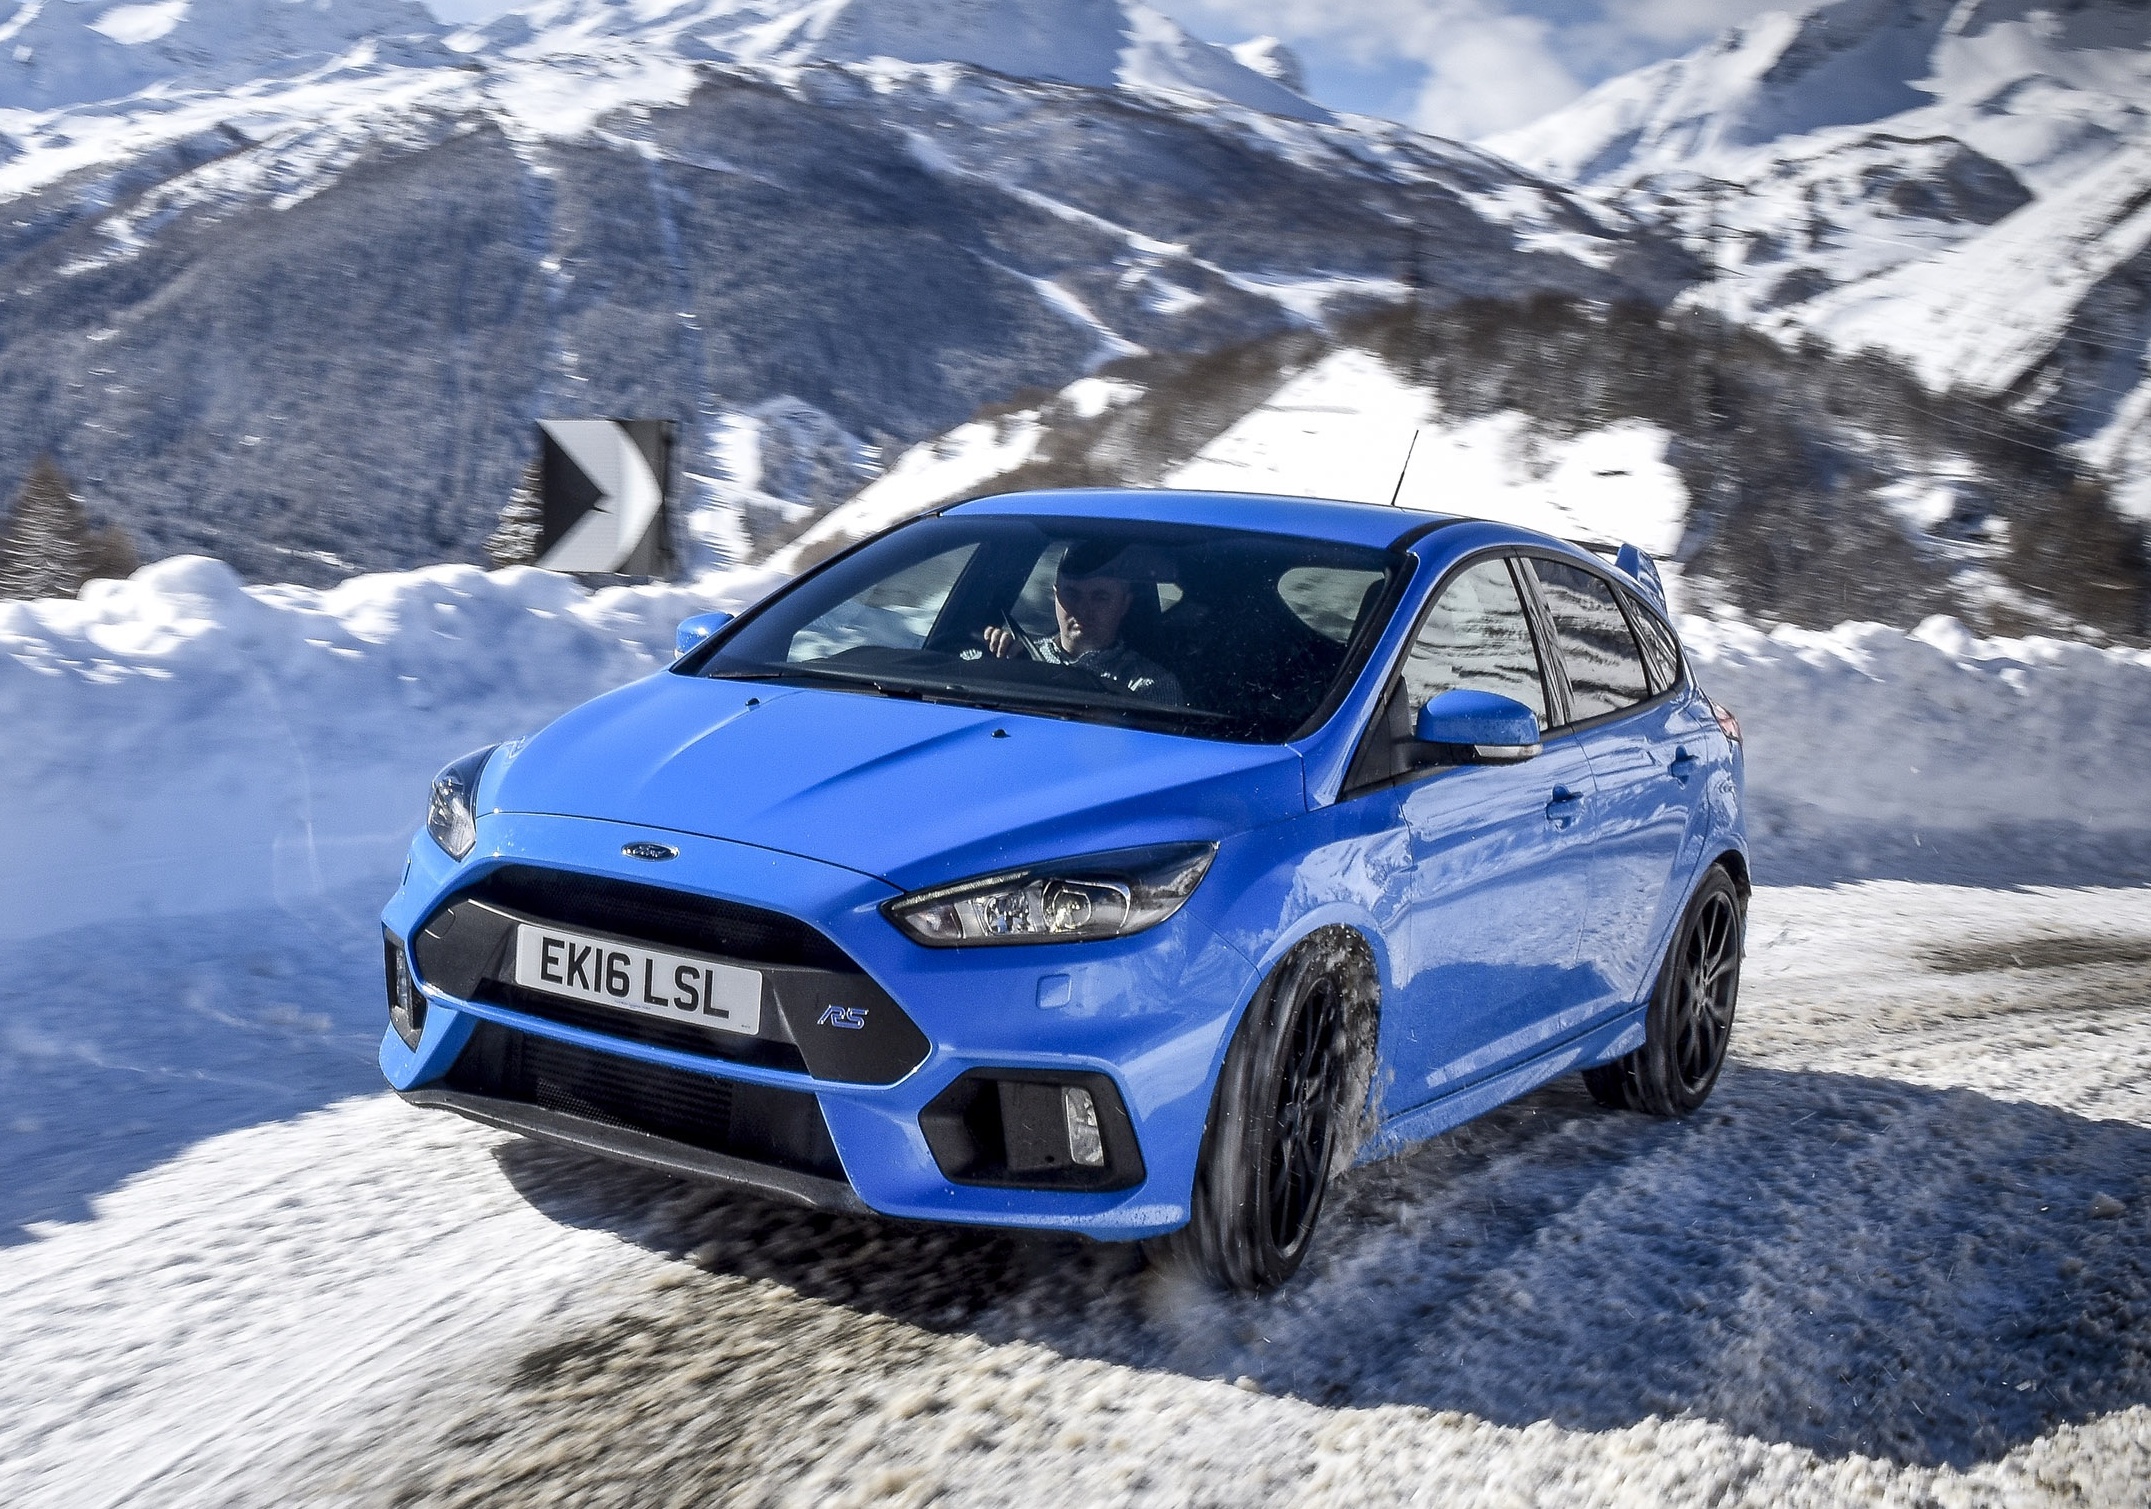 Next Ford Focus RS to come with hybrid powertrain – report